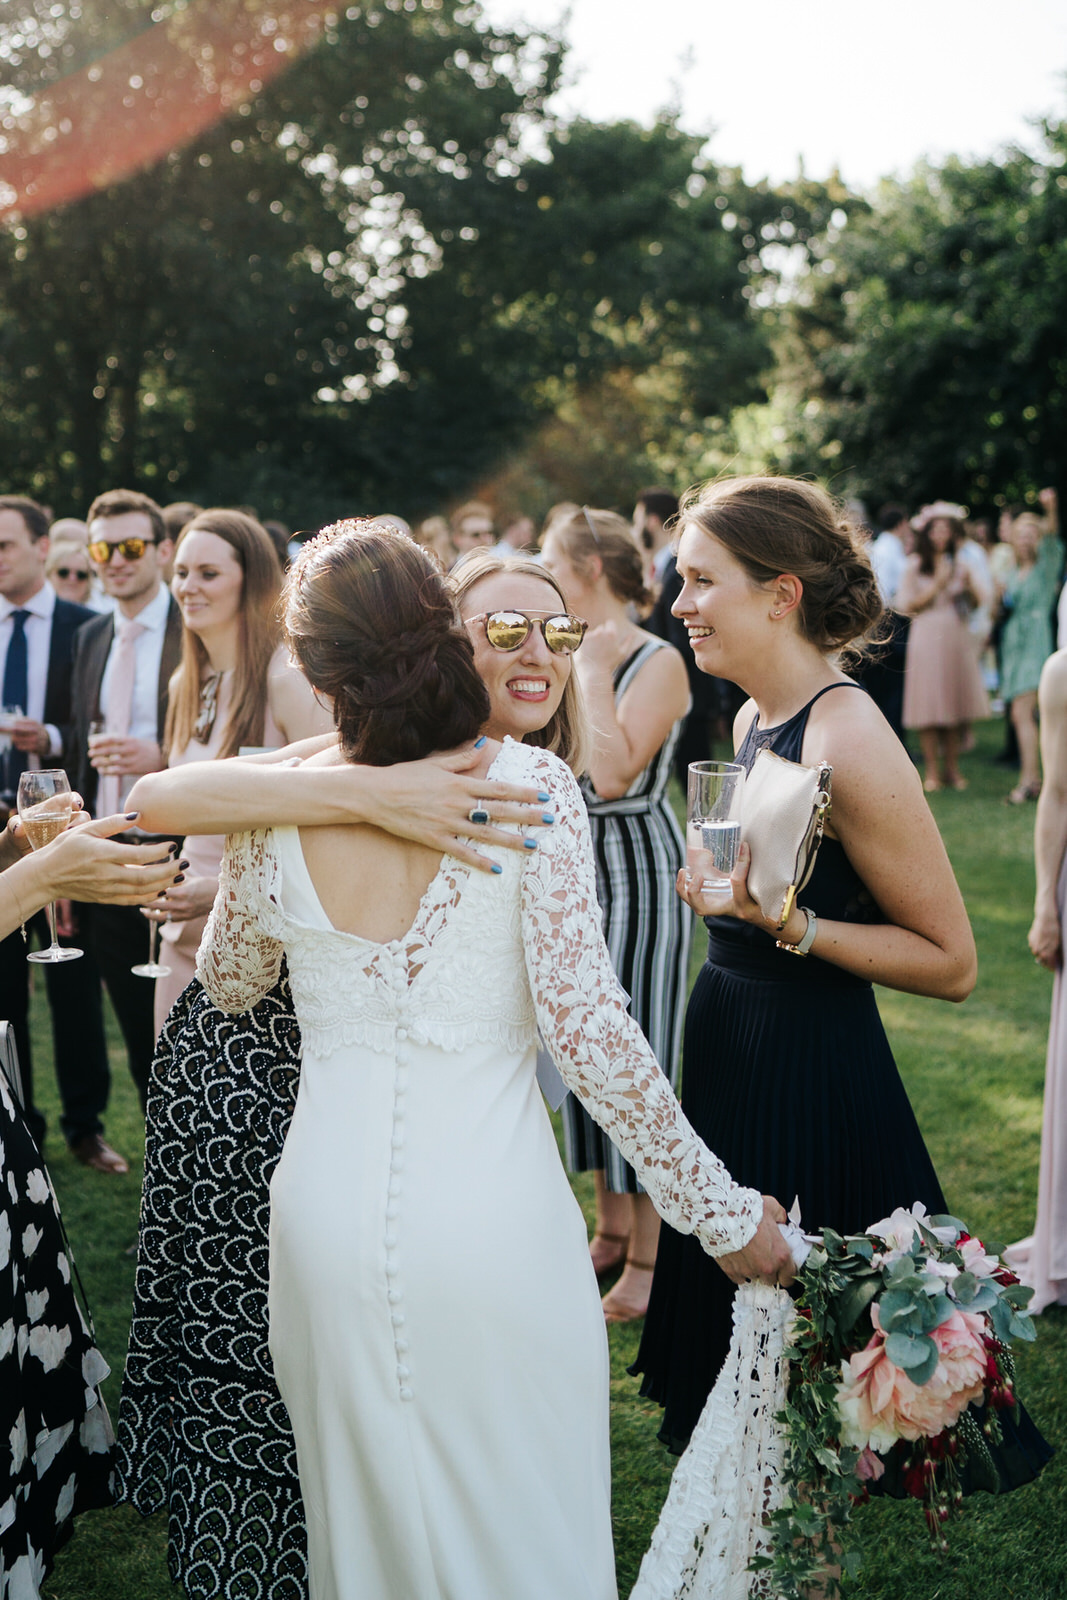  Bride receives hug from one of the guests during drinks ceremony 